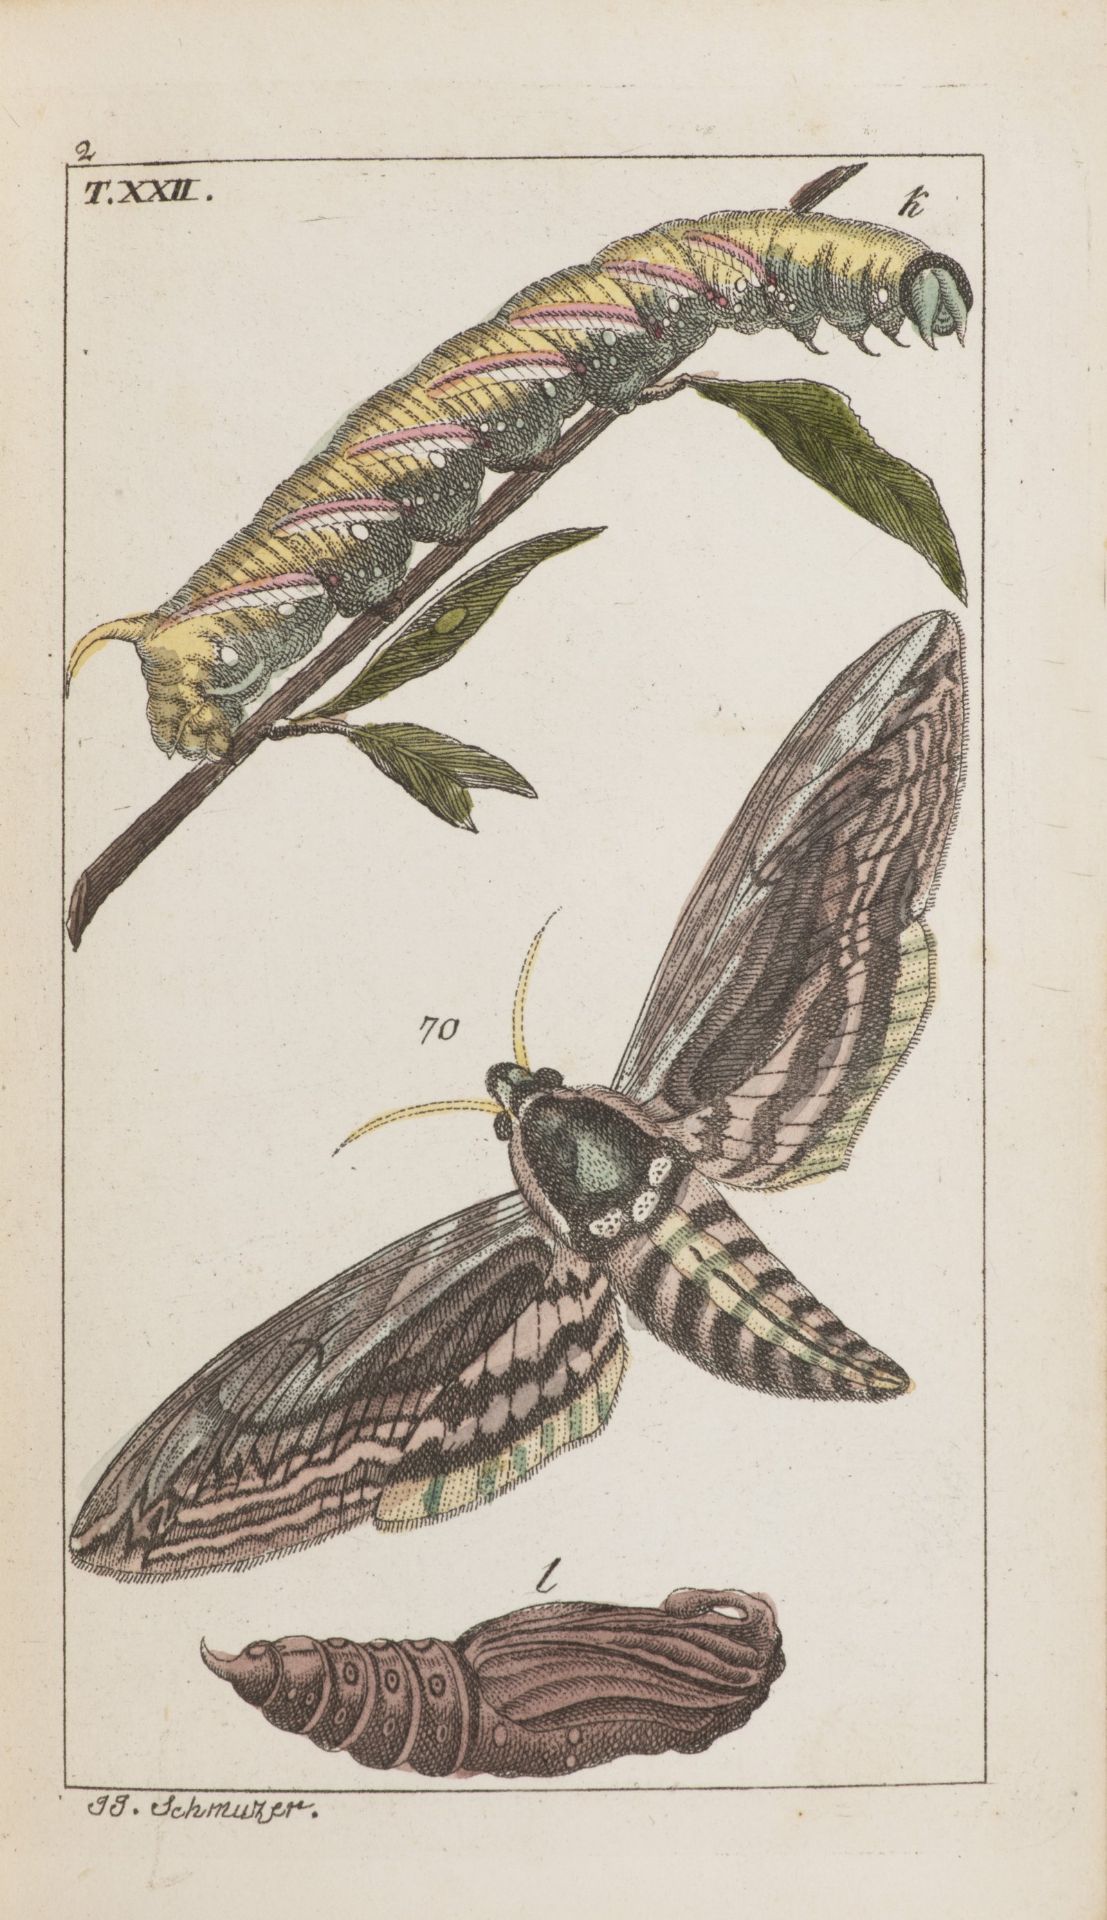 J.J. SCHMUZER 1795 - 1810: ATLAS OF INSECTS AND BUTTERFLIES Ca. 1810 Colored copperplate engravings,